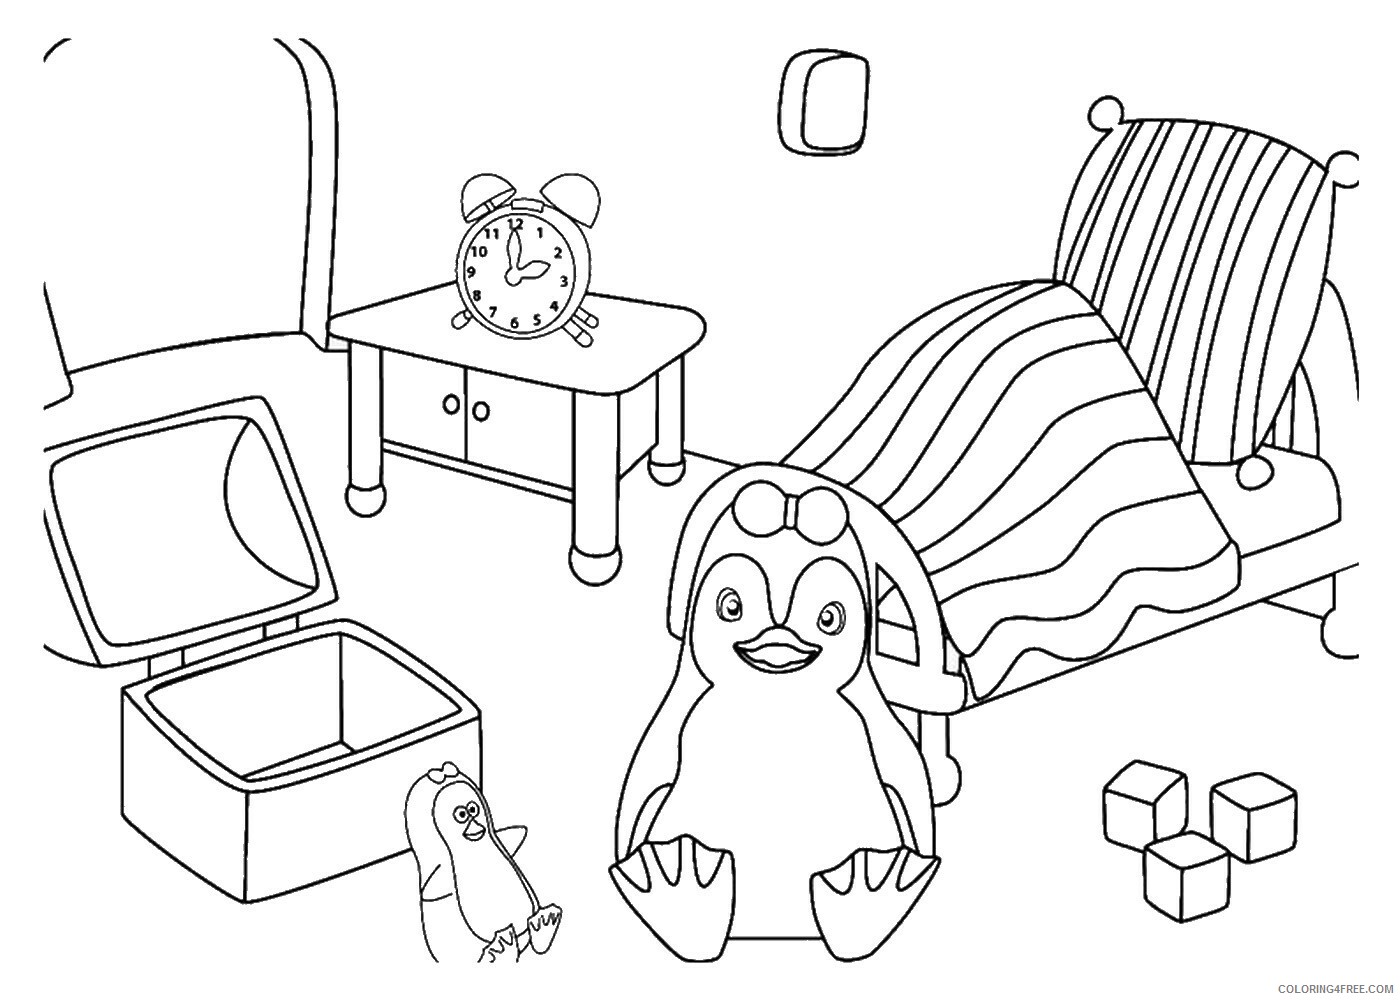 Ozie Boo Coloring Pages TV Film Ozie_Boo_cl_13 Printable 2020 05865 Coloring4free